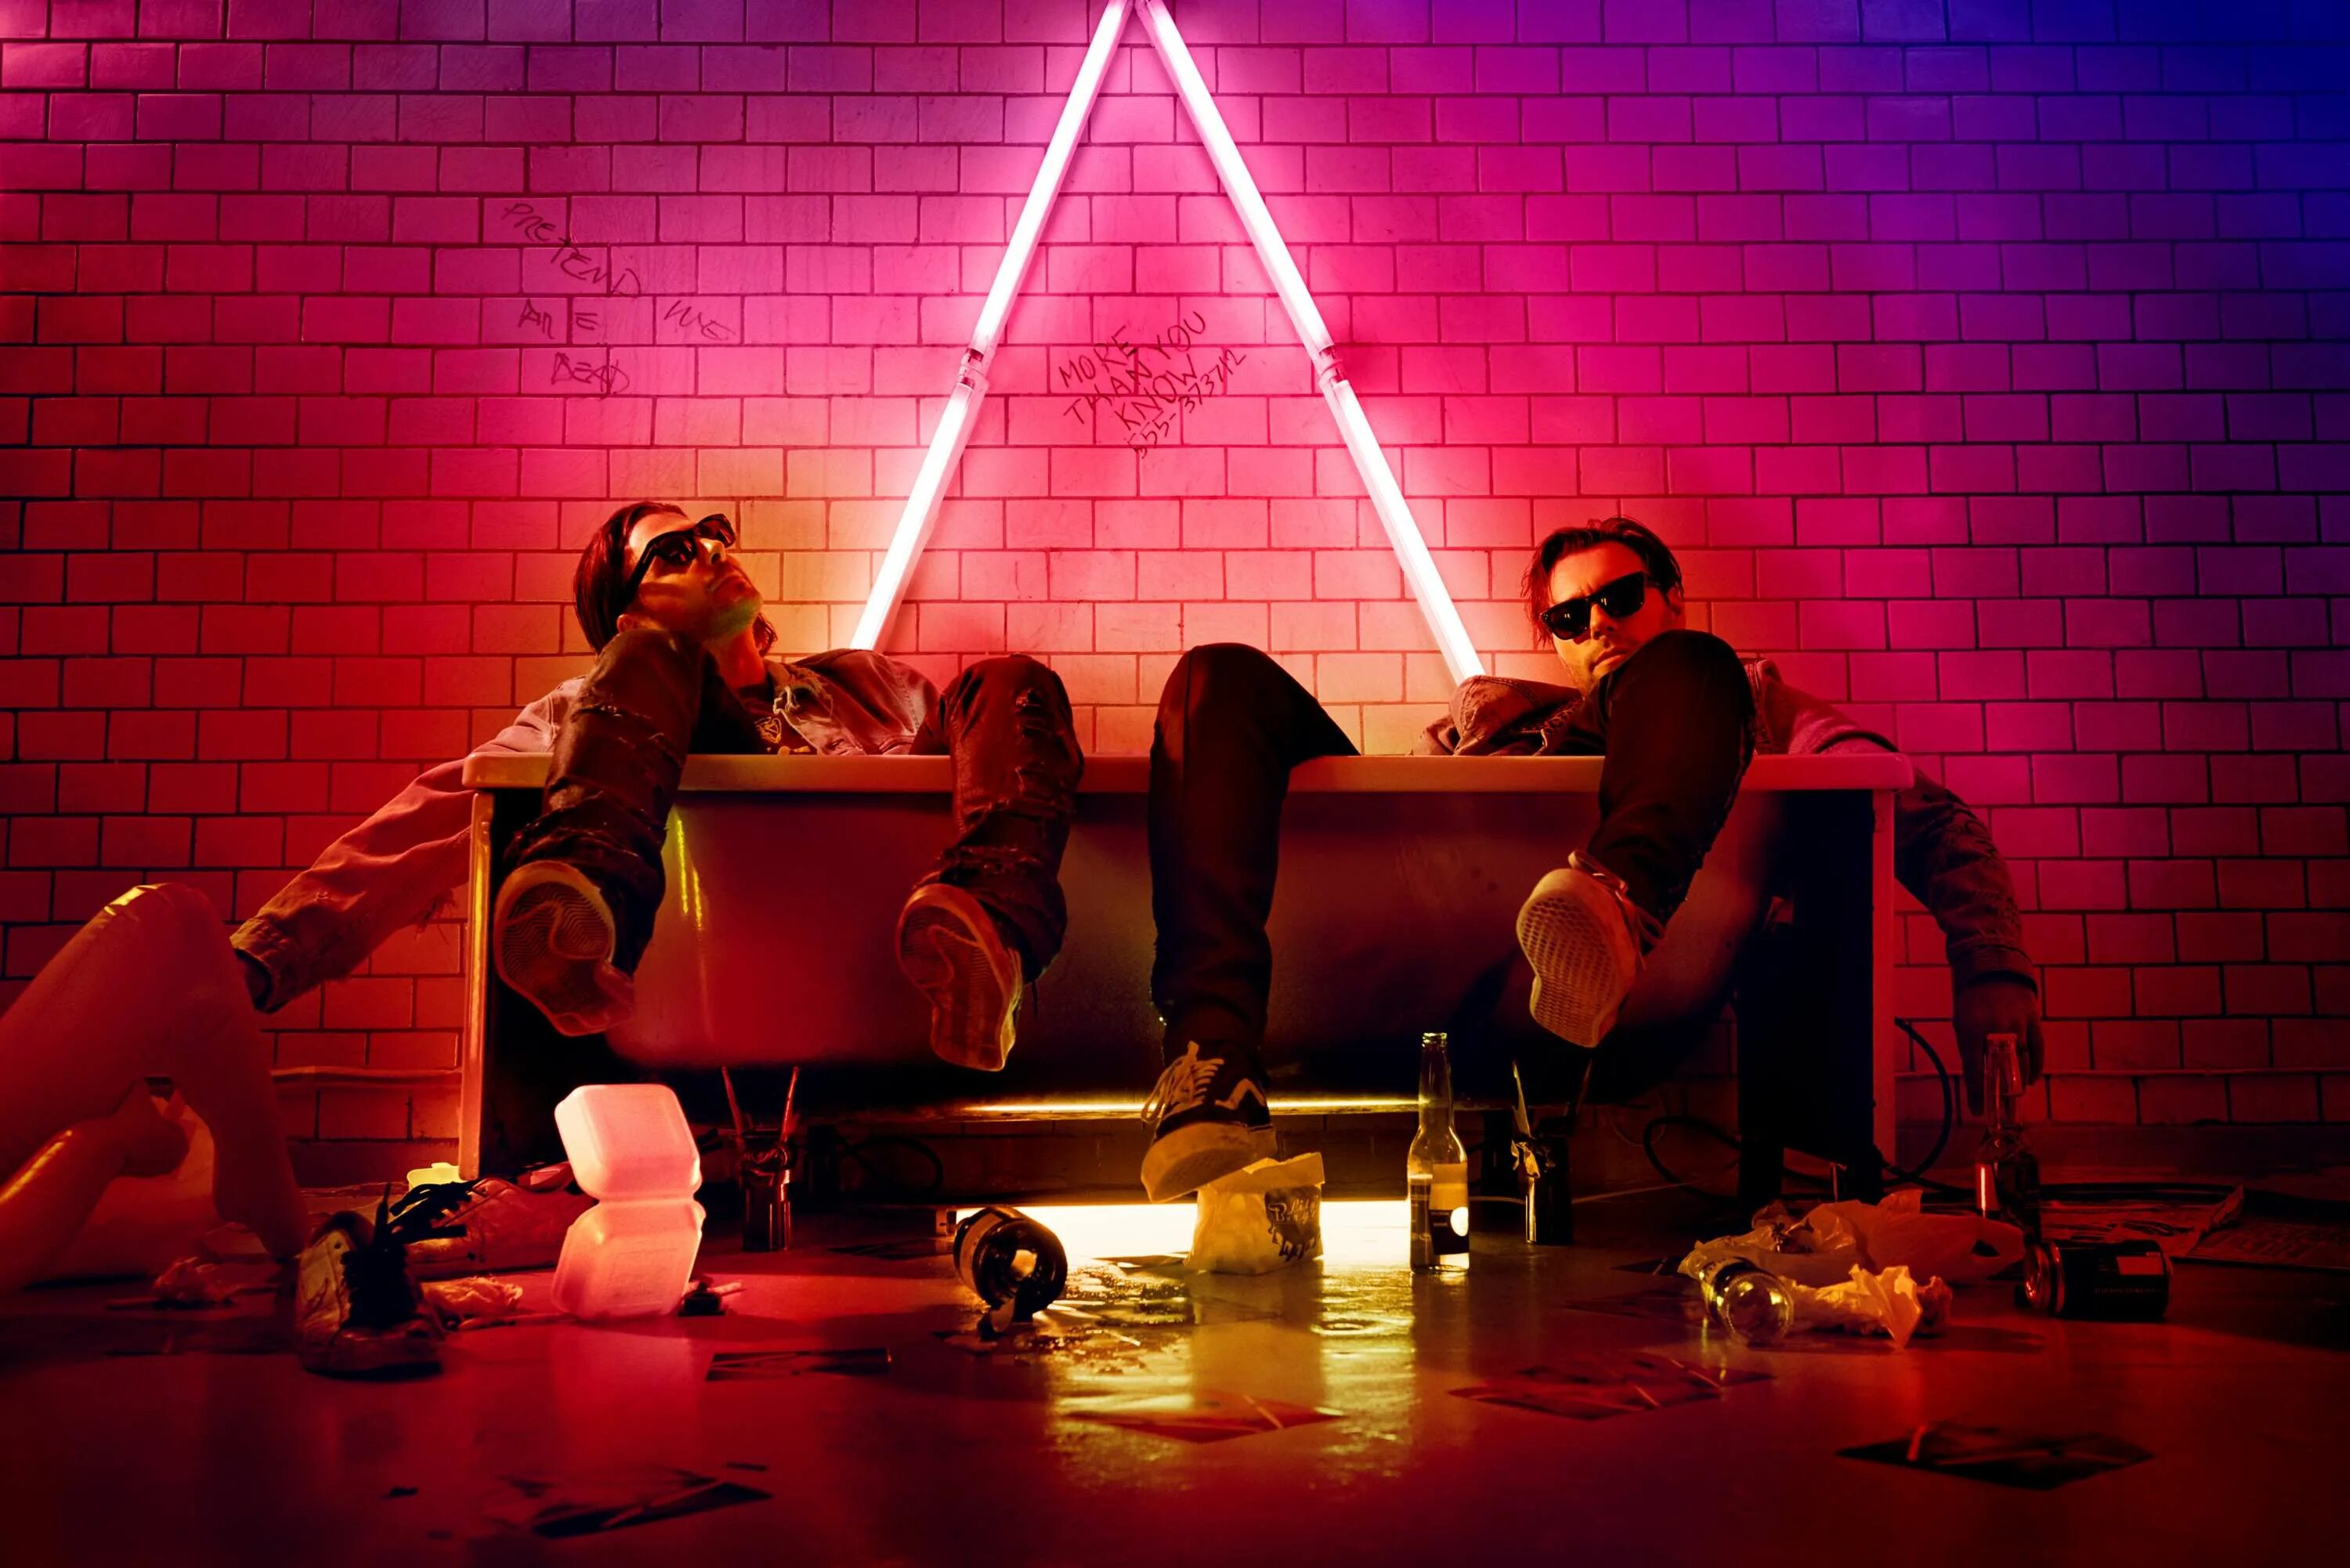 More than you know Axwell ingrosso. Axwell λ ingrosso - more than you know. Axwell девушка. Axwell more than you